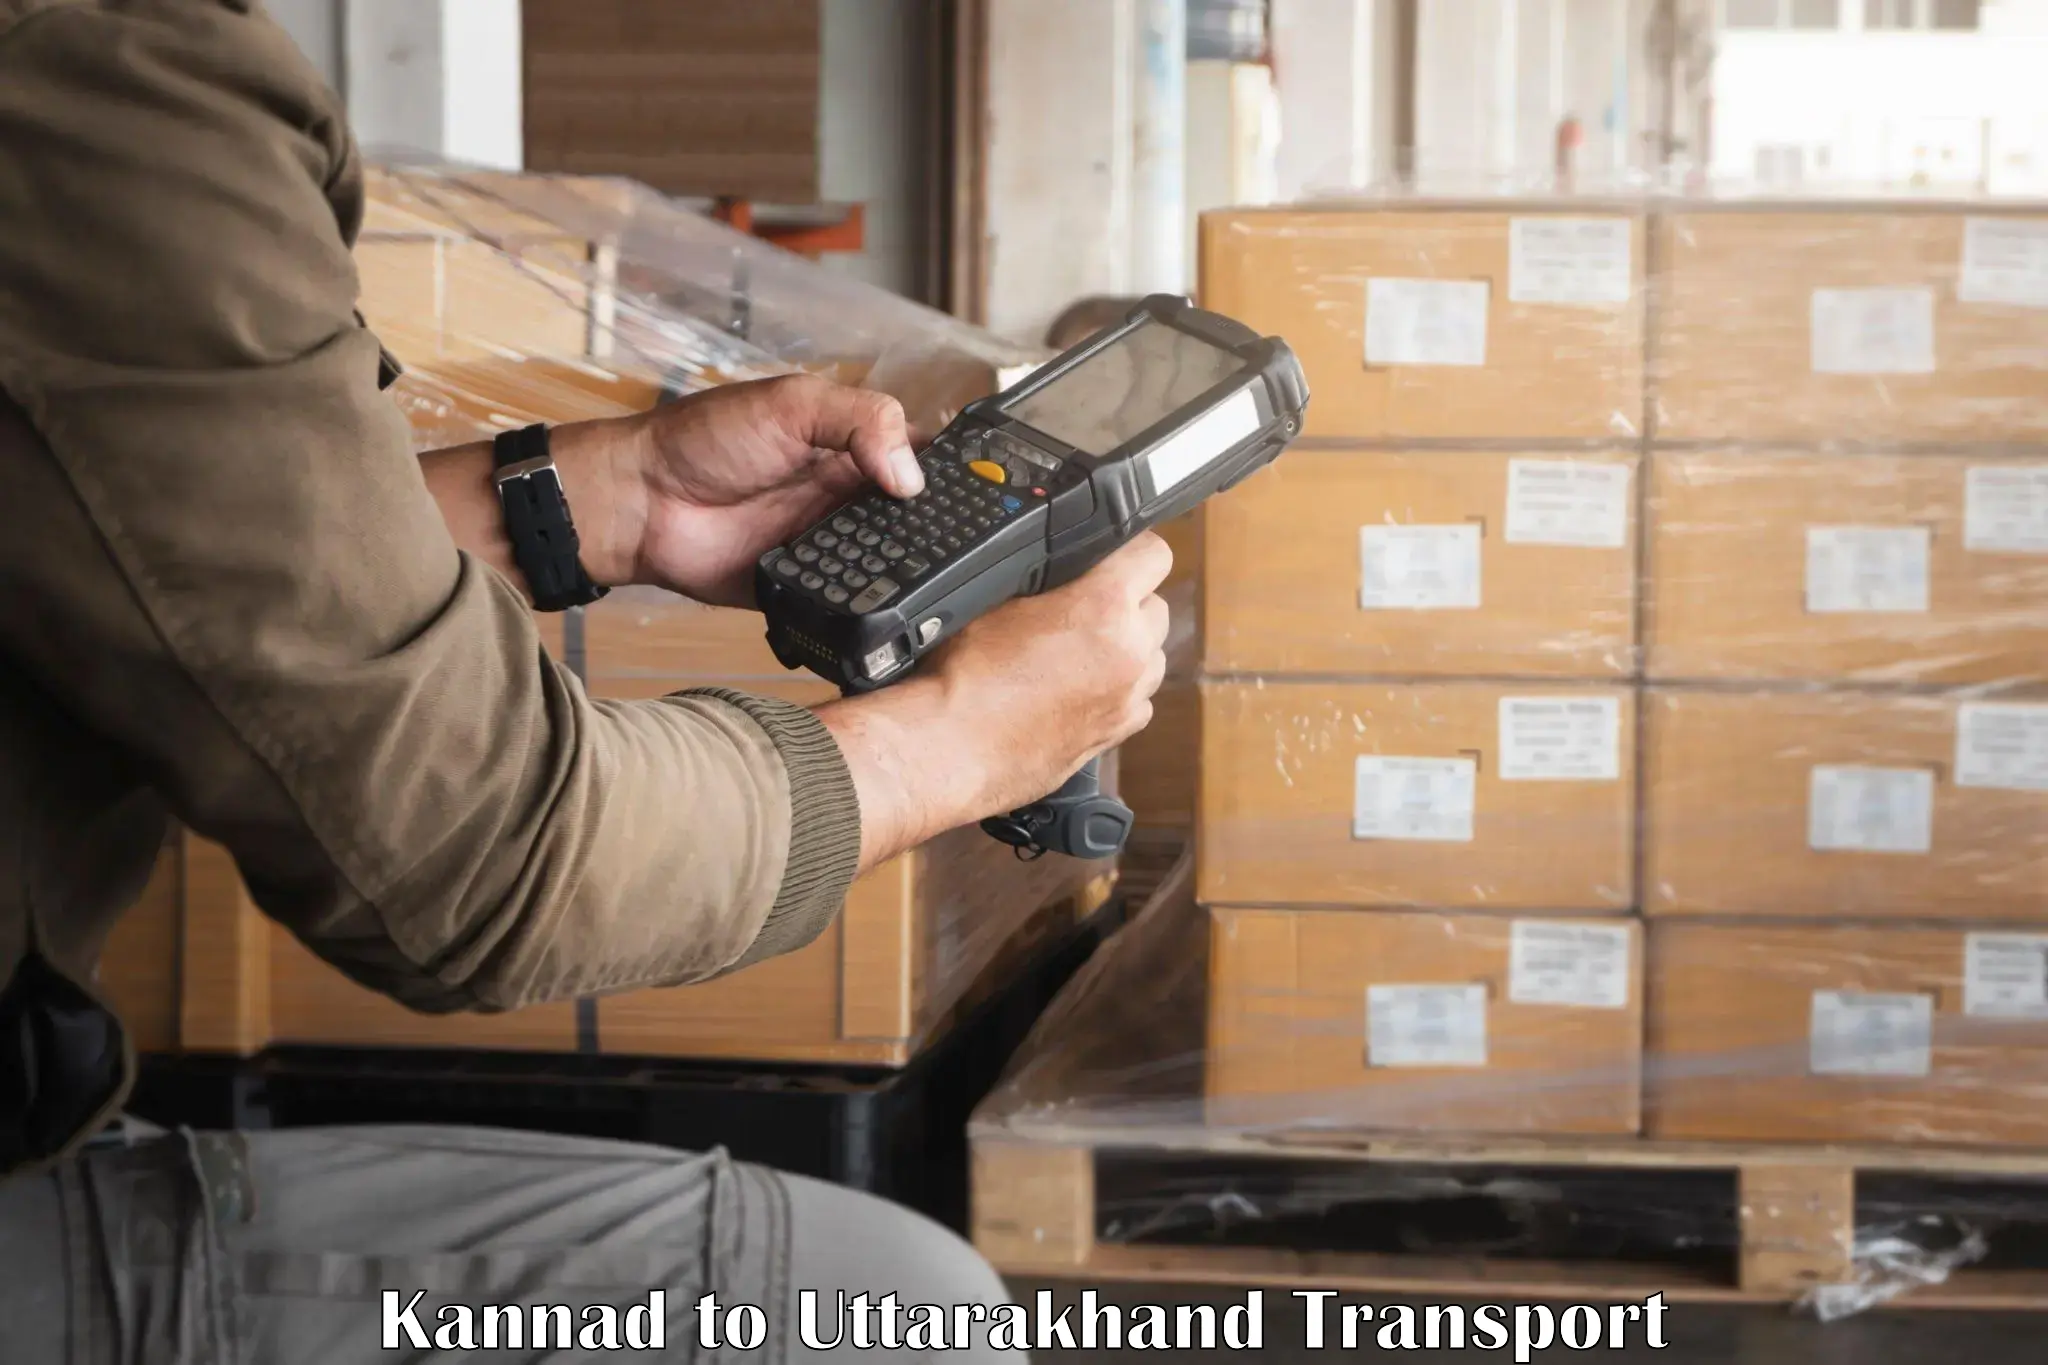 Container transport service Kannad to Lansdowne